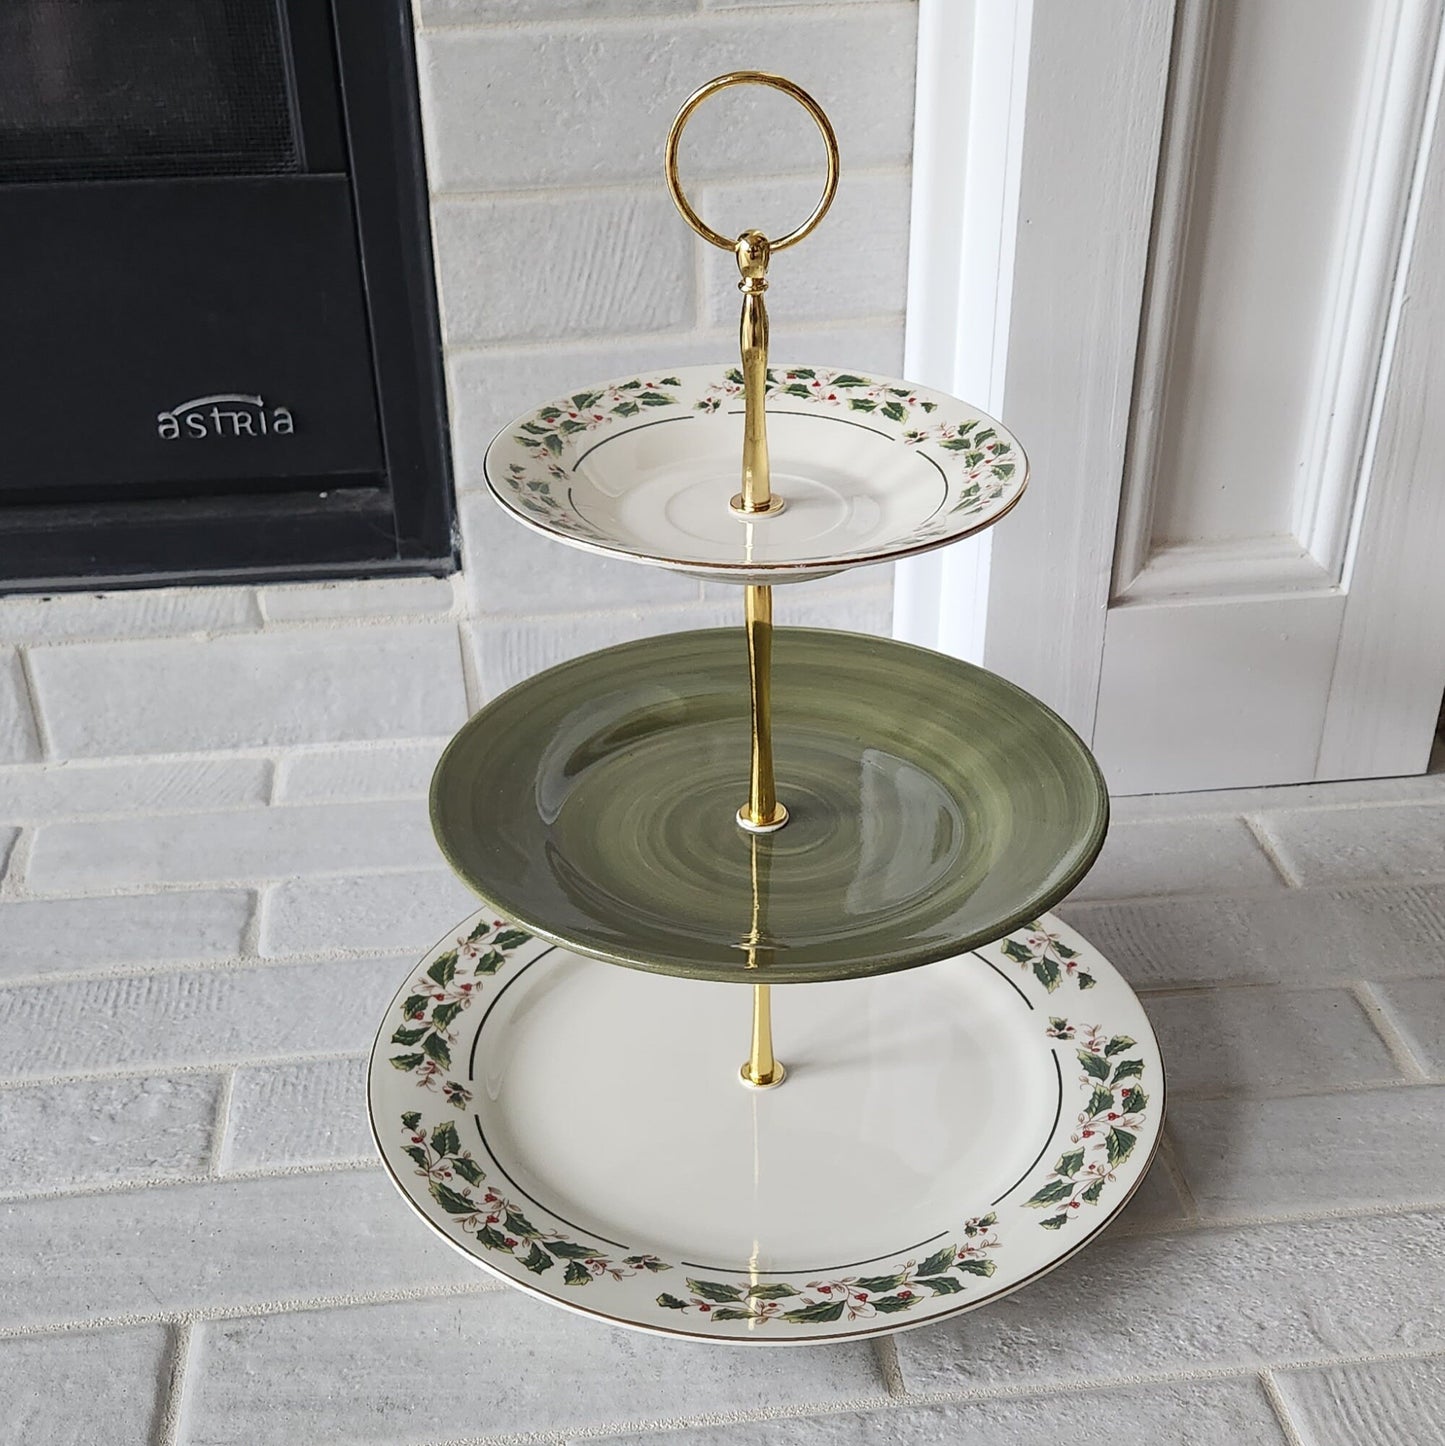 3 Tier Cake Stand Holly Pattern